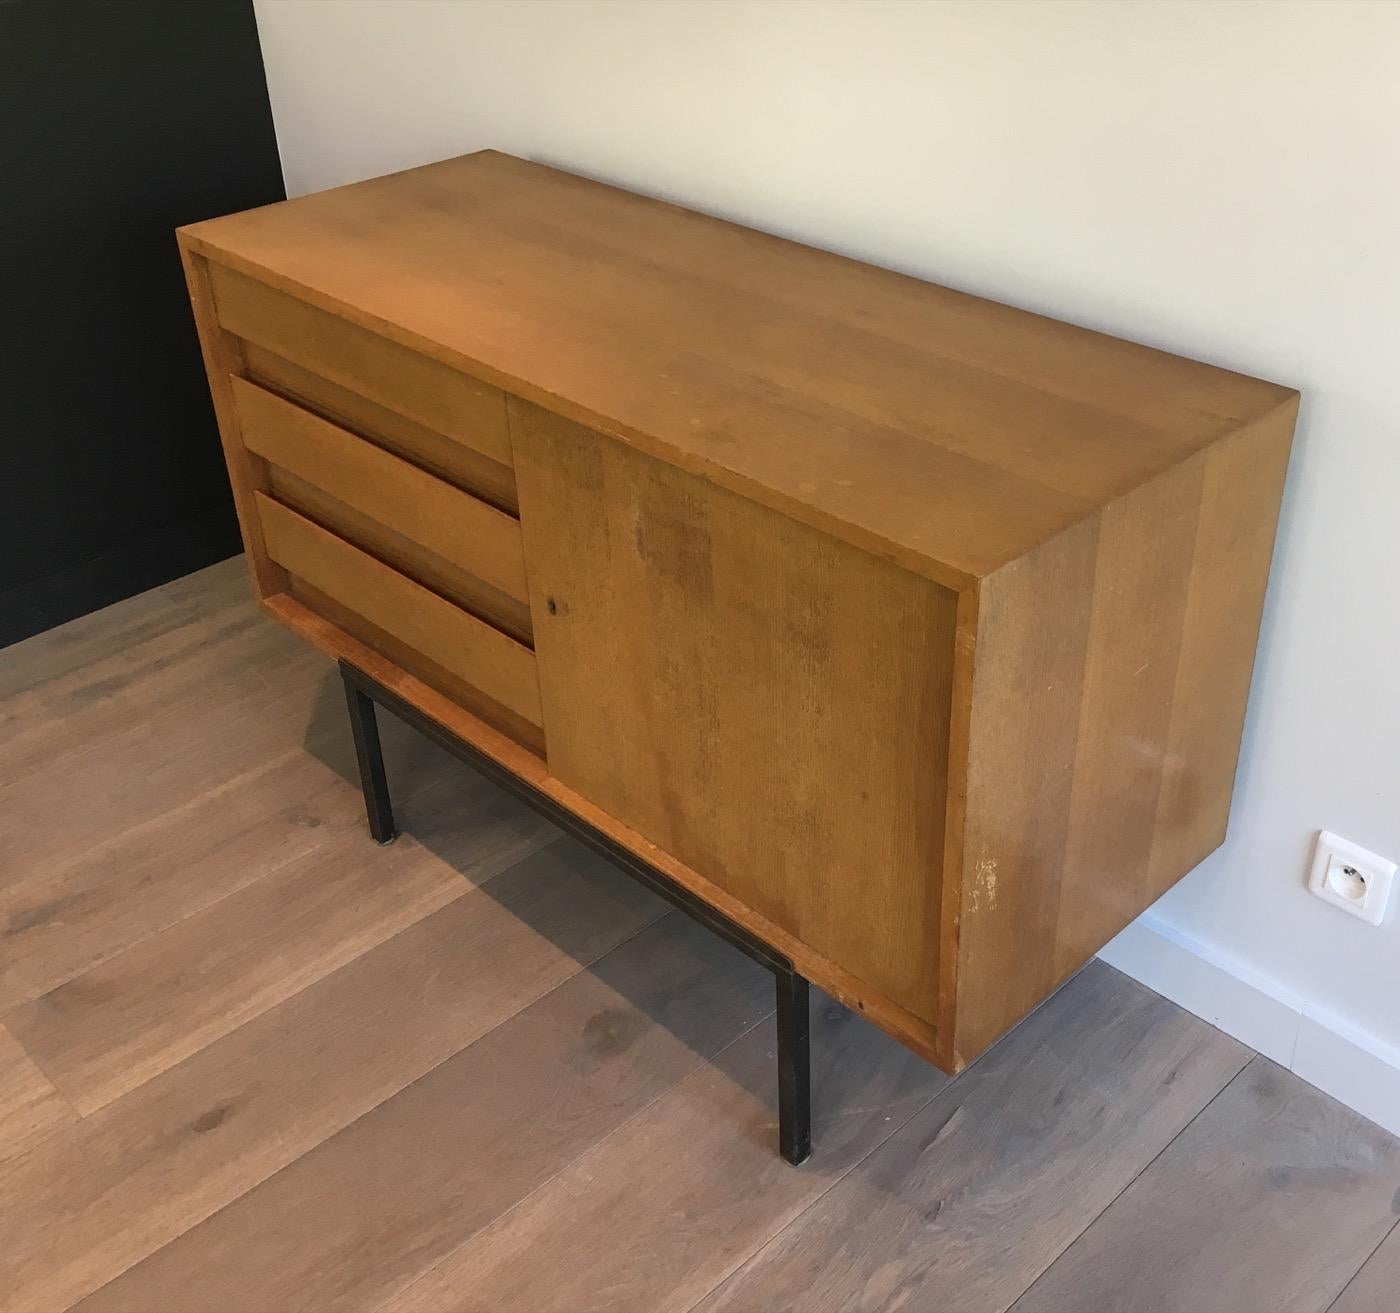 Mid-Century Modern Sideboard with One Door and 3 Drawers on a Modernist Steel Base